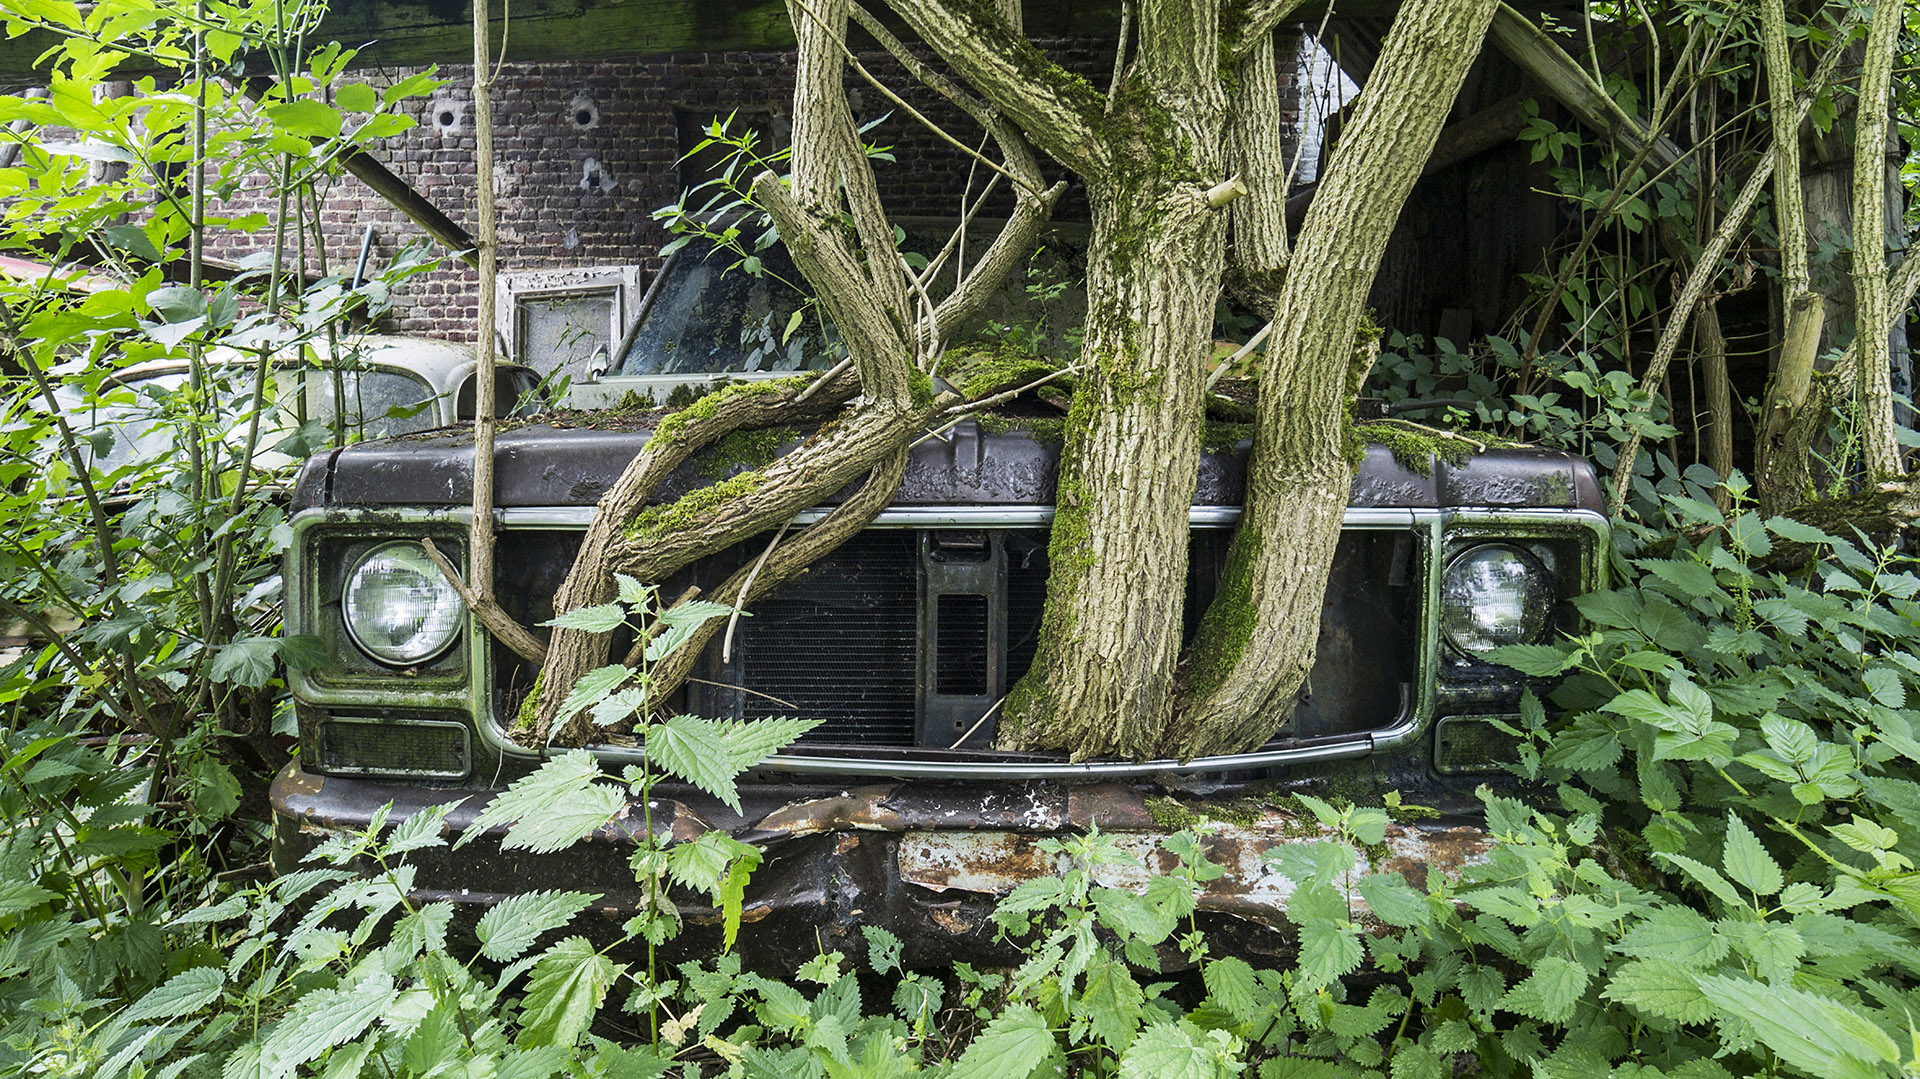 Photographing derelict sites, by Jonk